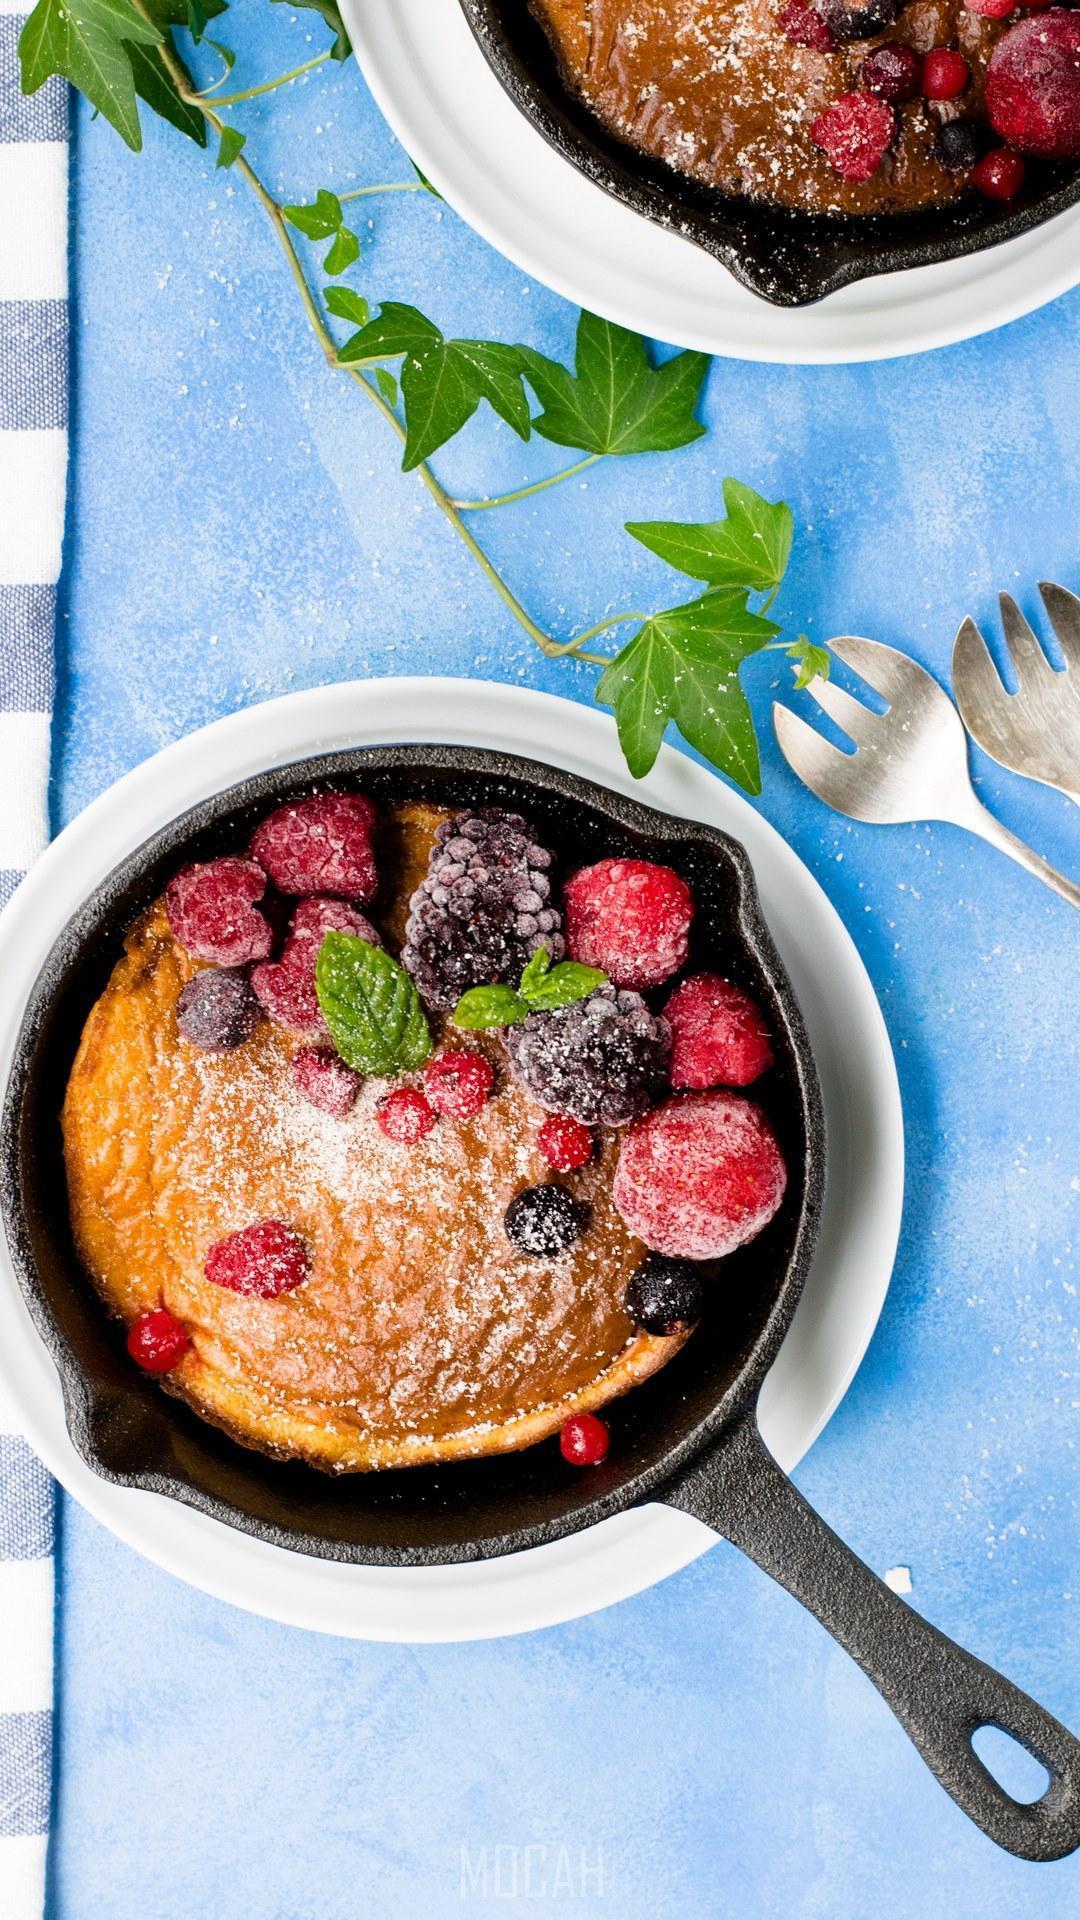 HD wallpaper, 1080X1920, Google Pixel 2 Wallpaper Hd Download, Pancakes In Cast Iron Skillet With Berries And Blue Cloth, Dutch Baby Pancake